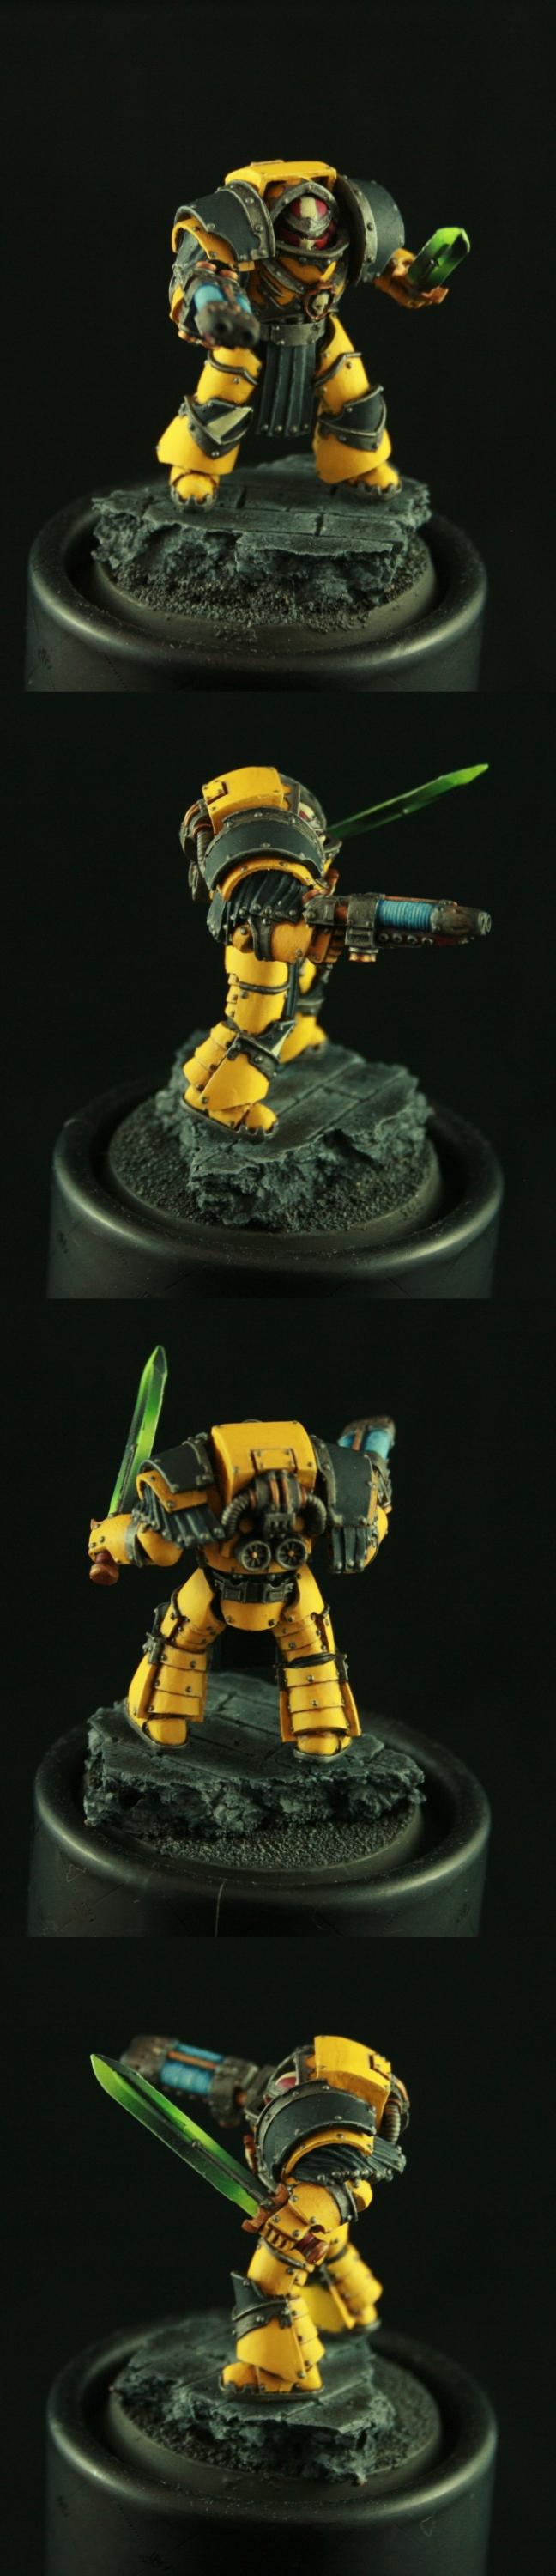 Cataphractii, Forge World, Imperial Fists, Warhammer 40,000